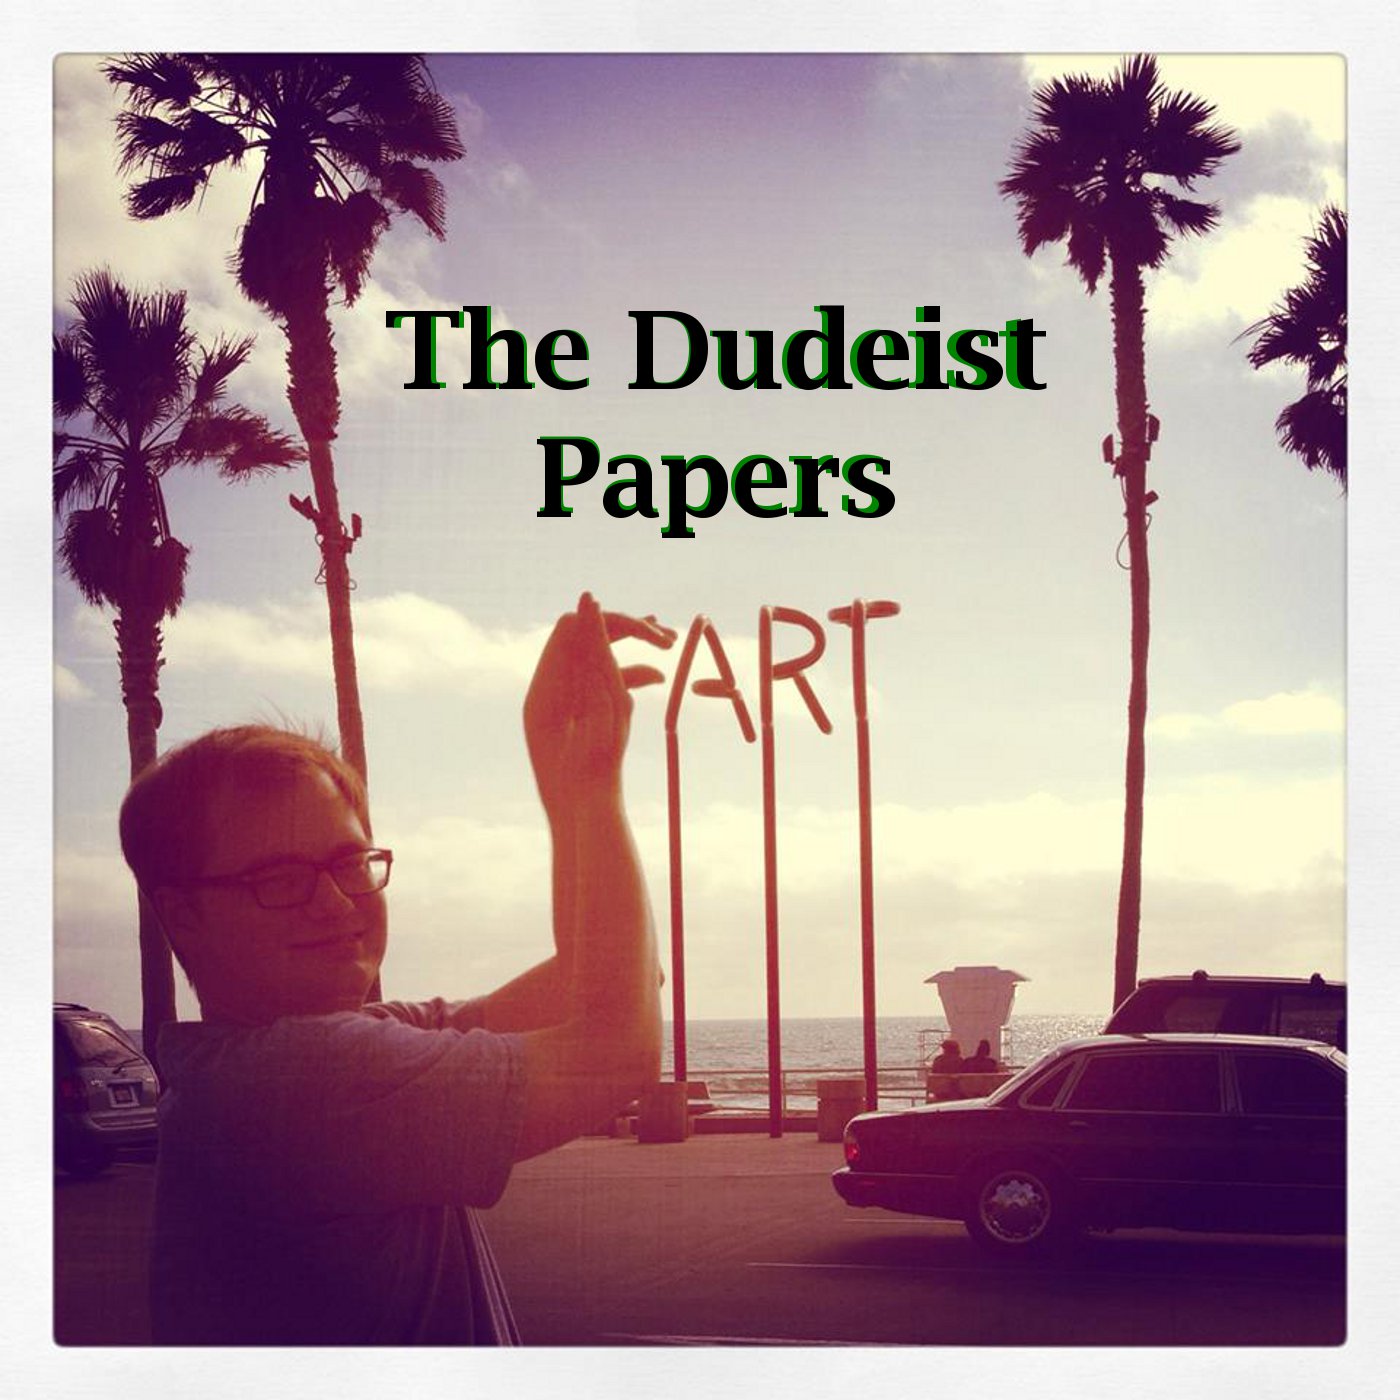 The Dudeist Papers